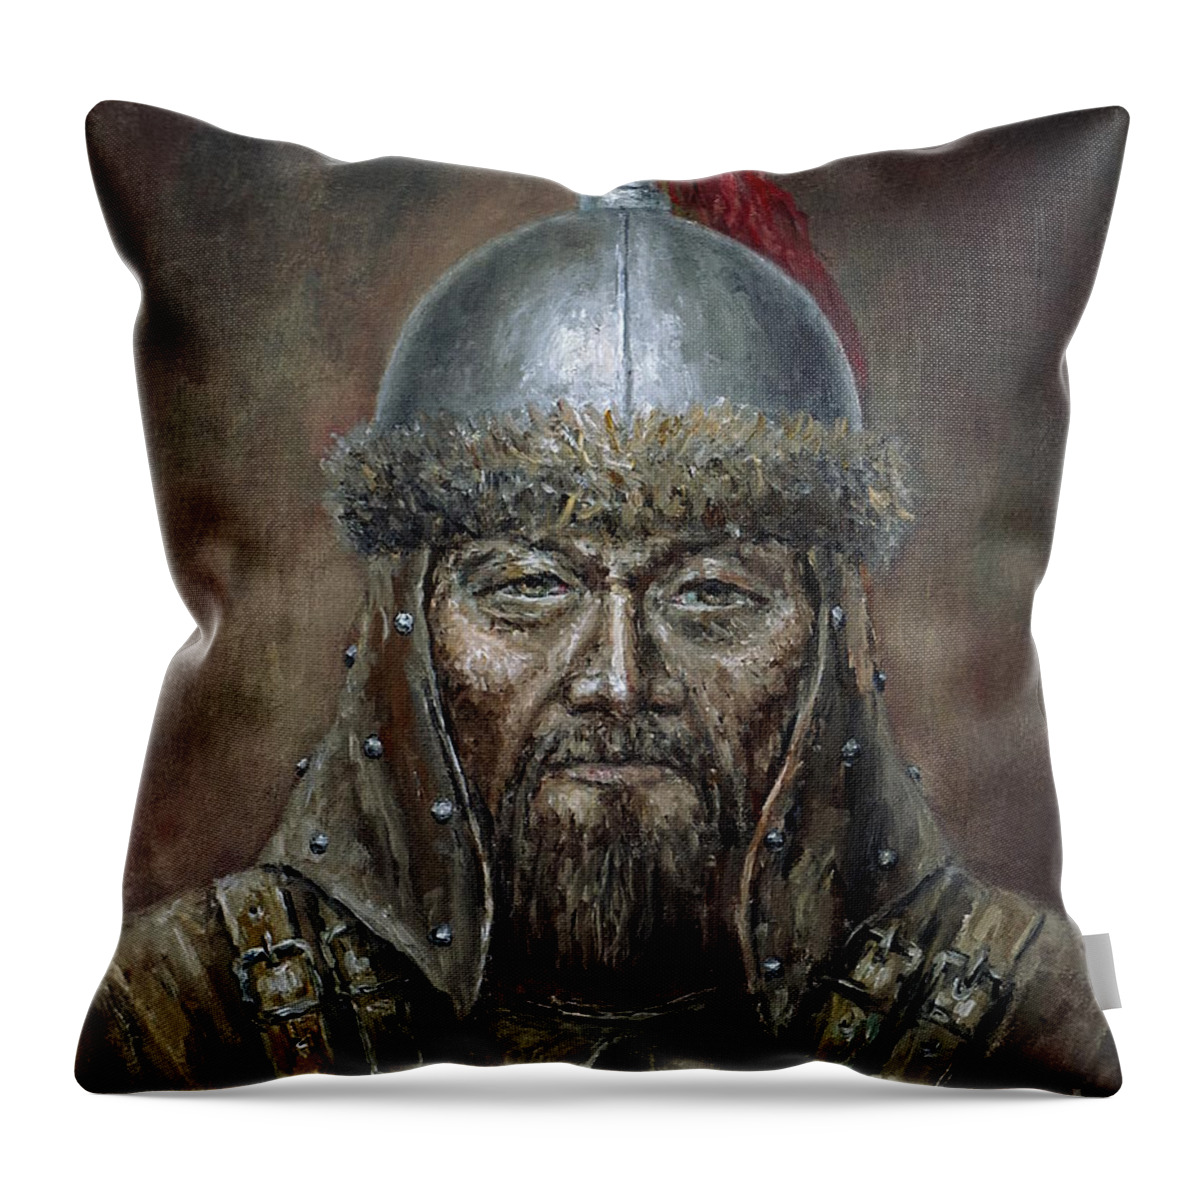 Genghis Khan Throw Pillow featuring the painting Genhis Khan by Arturas Slapsys